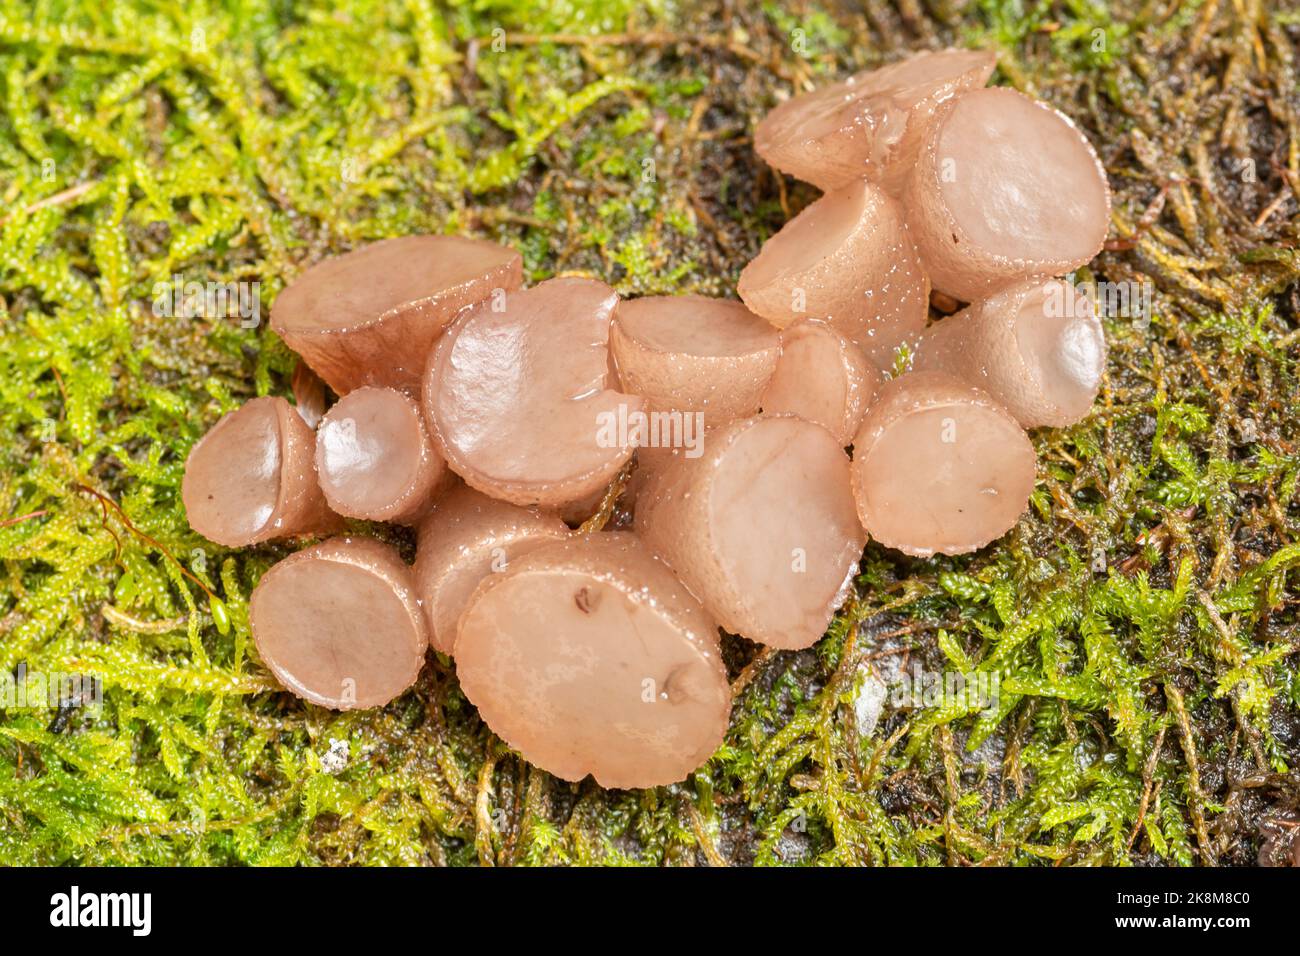 Beech jellydisc fungi (Neobulgaria pura), jelly-like fungus growing on fallen trunk of a beech tree during Autumn or October, West Sussex, England, UK Stock Photo